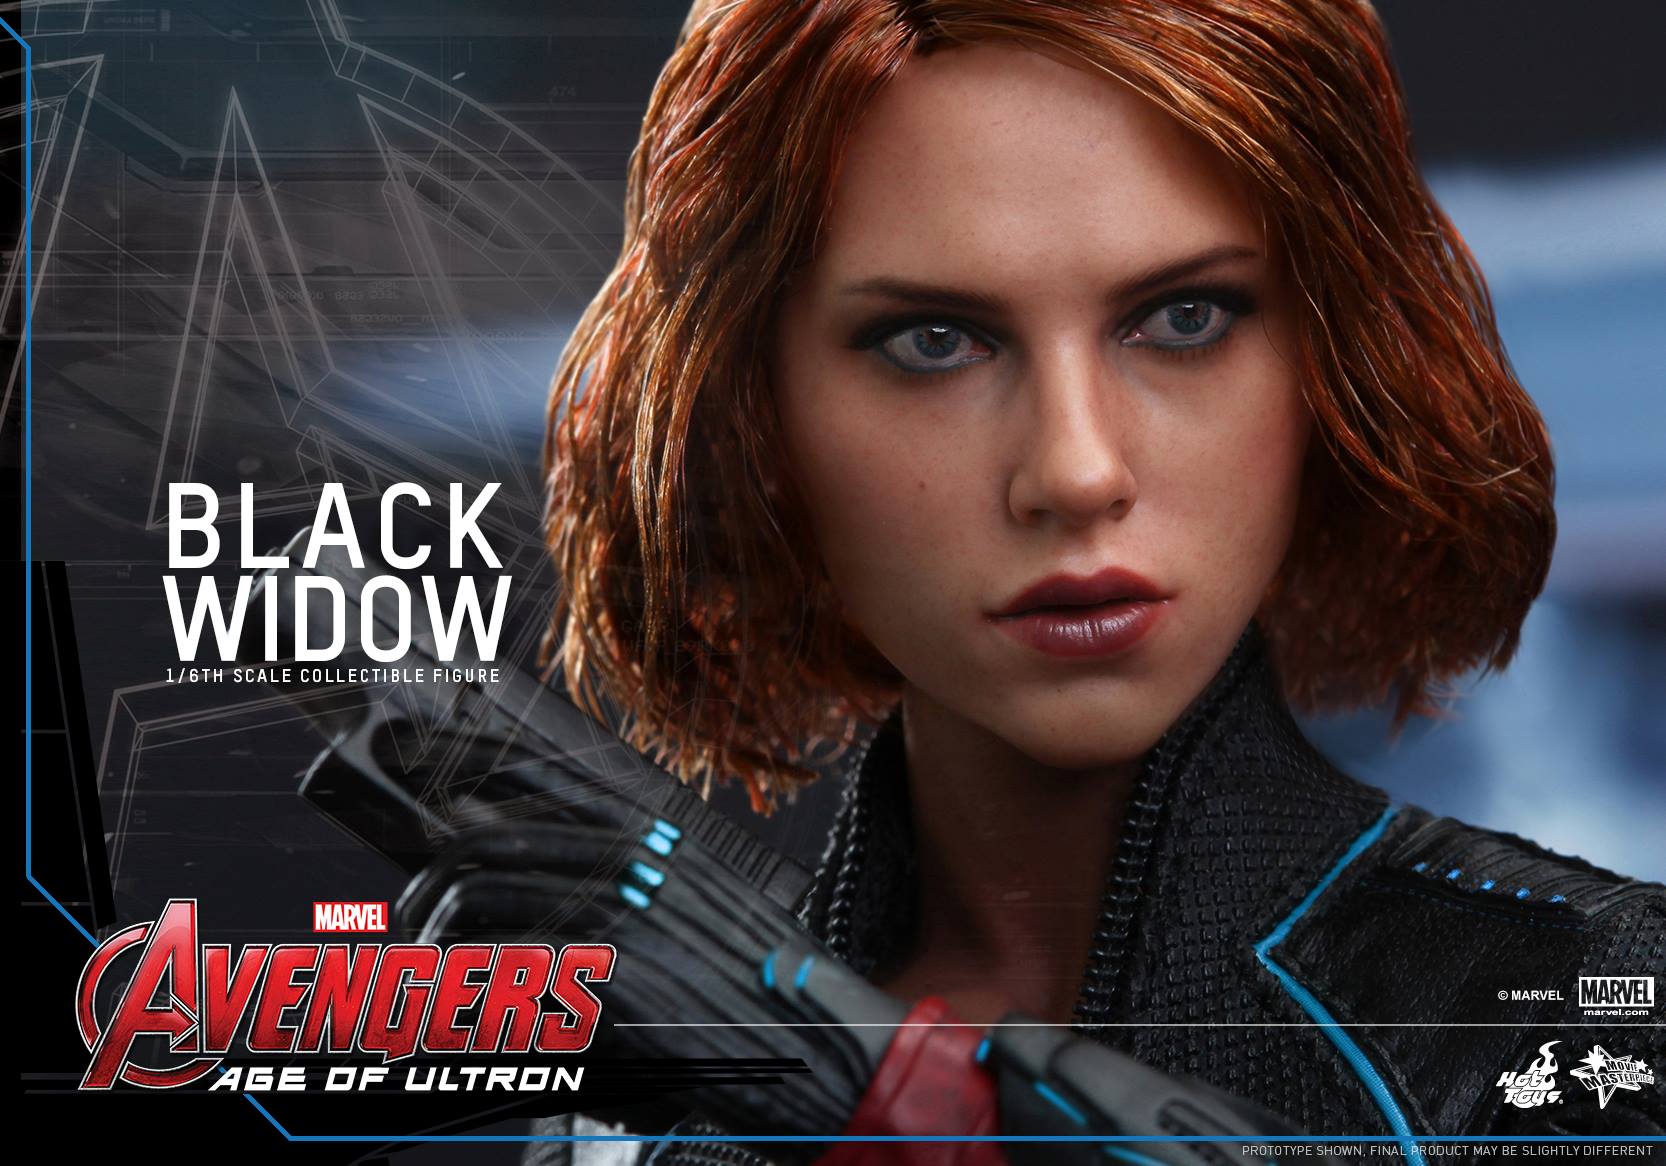 Hot Toys Black Widow Avengers: Age of Ultron